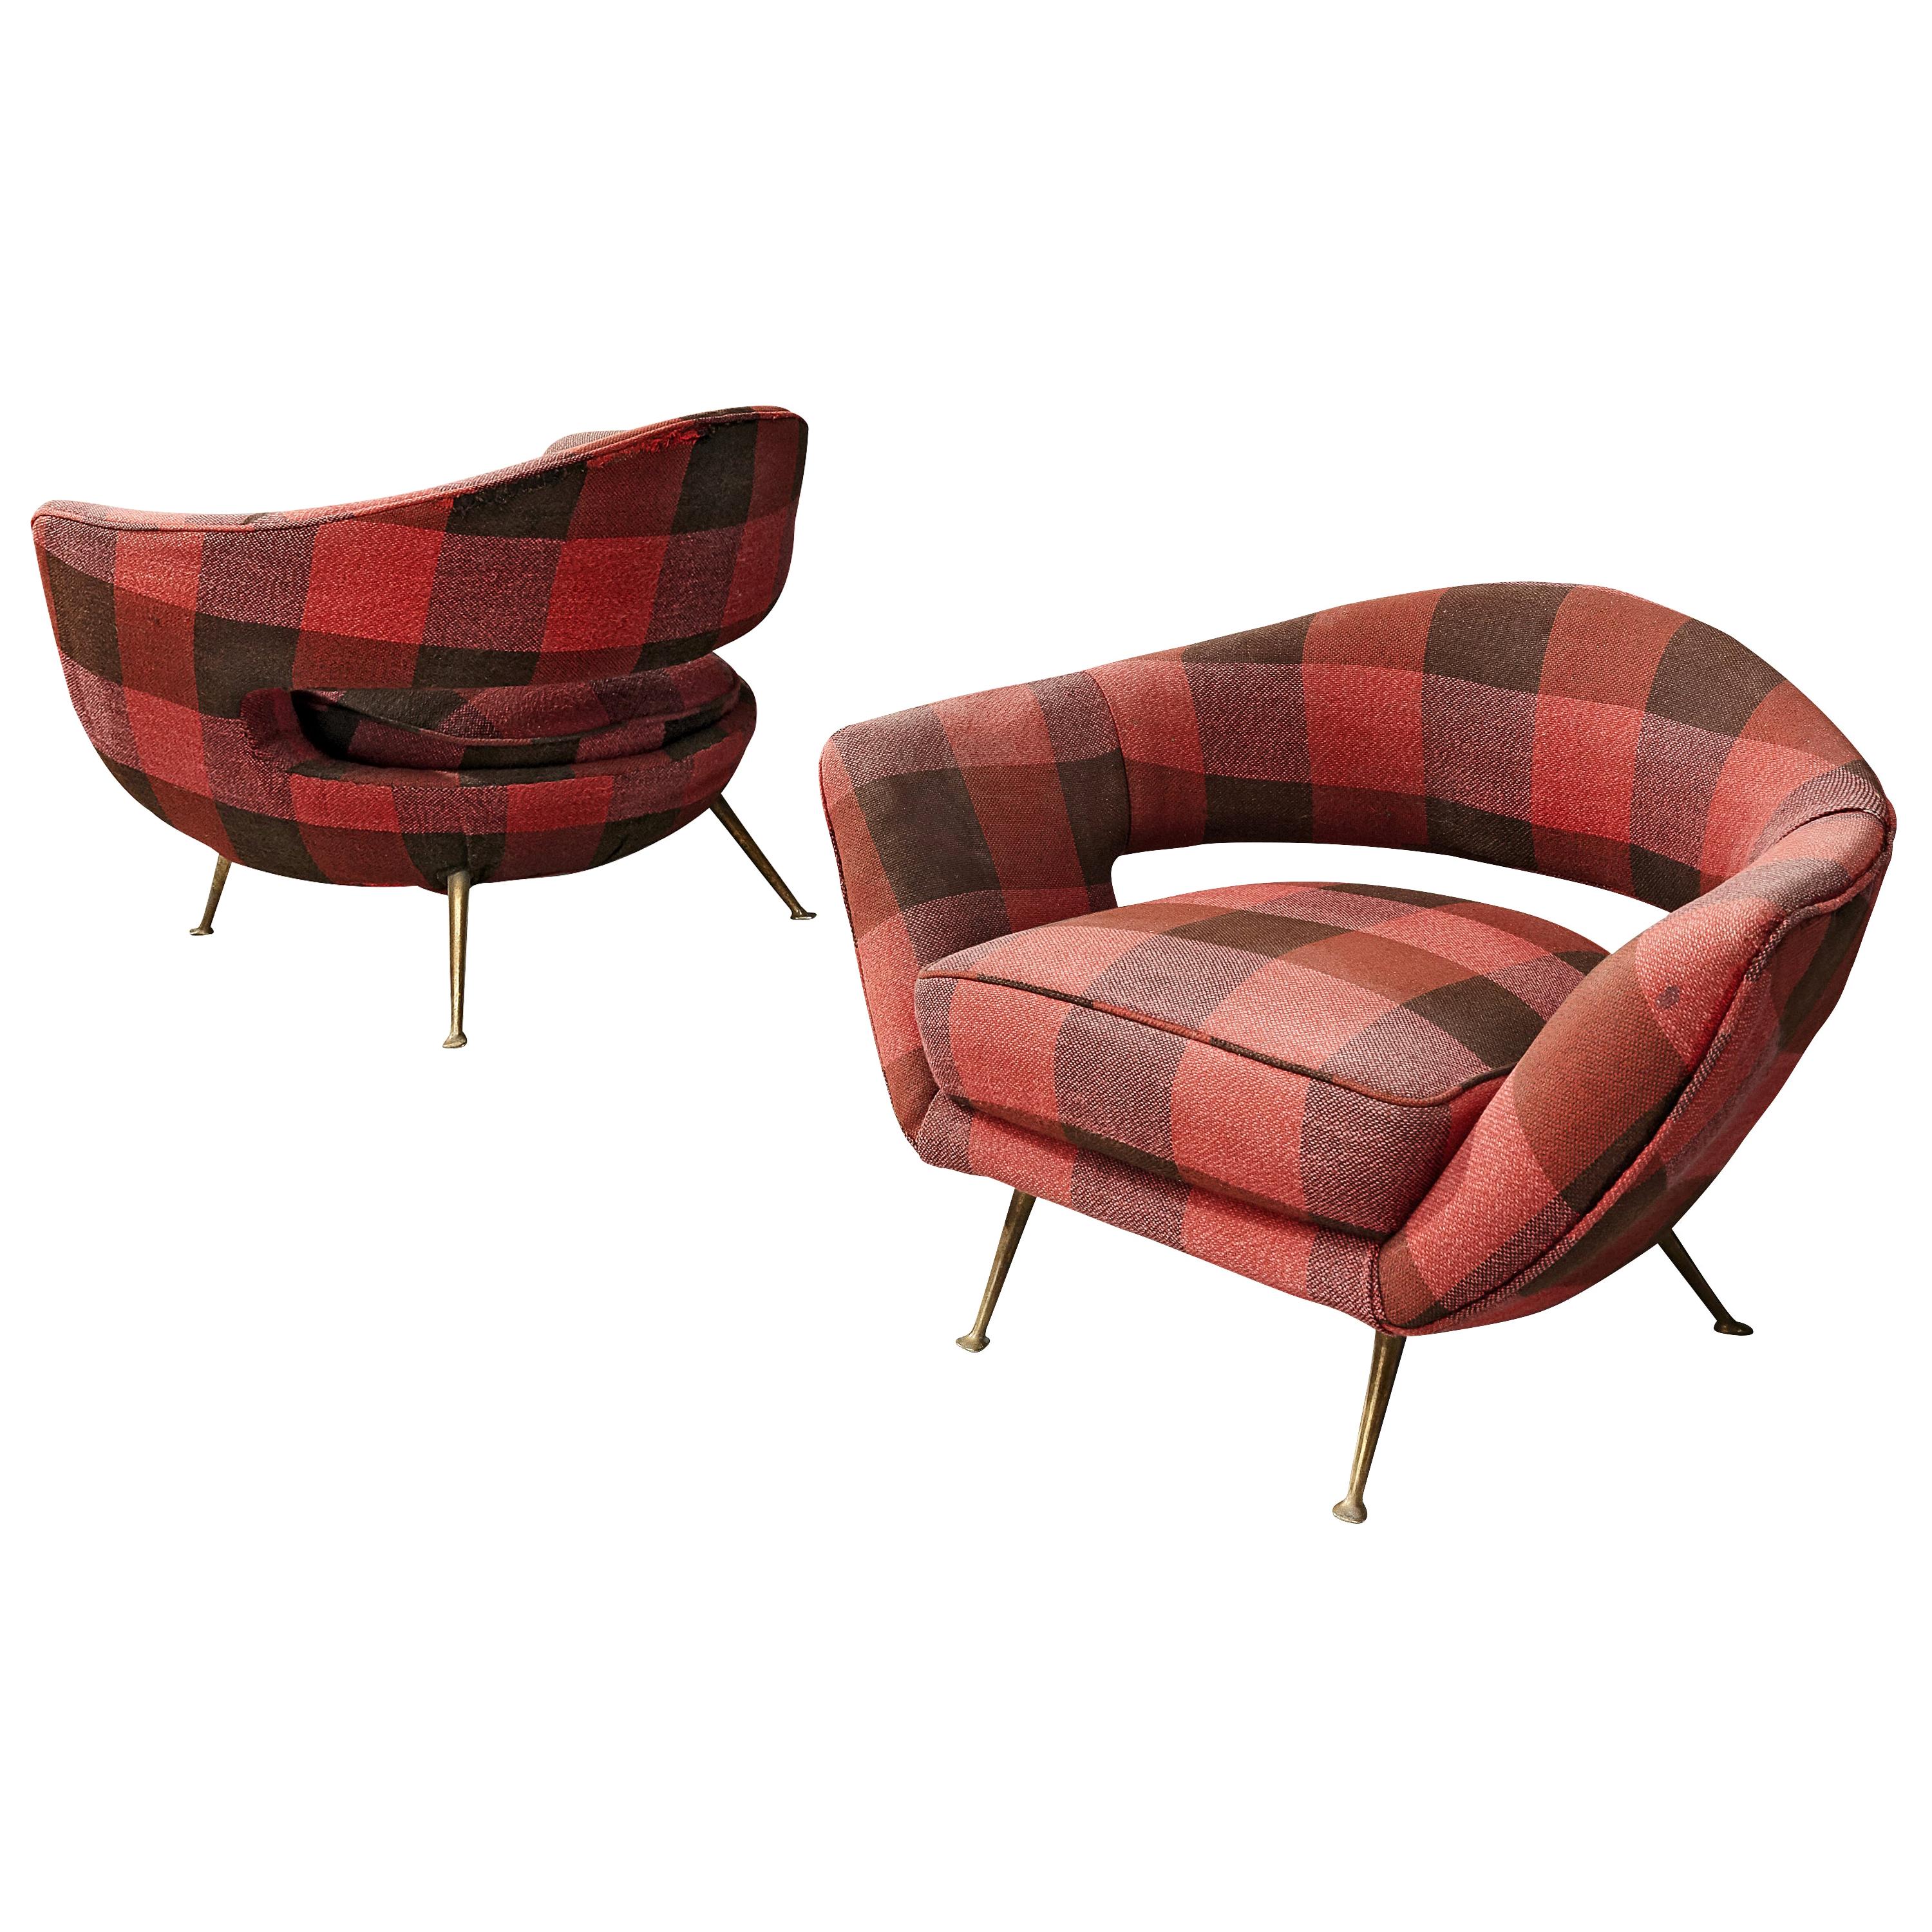 Pair of Italian Lounge Chairs in Checkered Upholstery